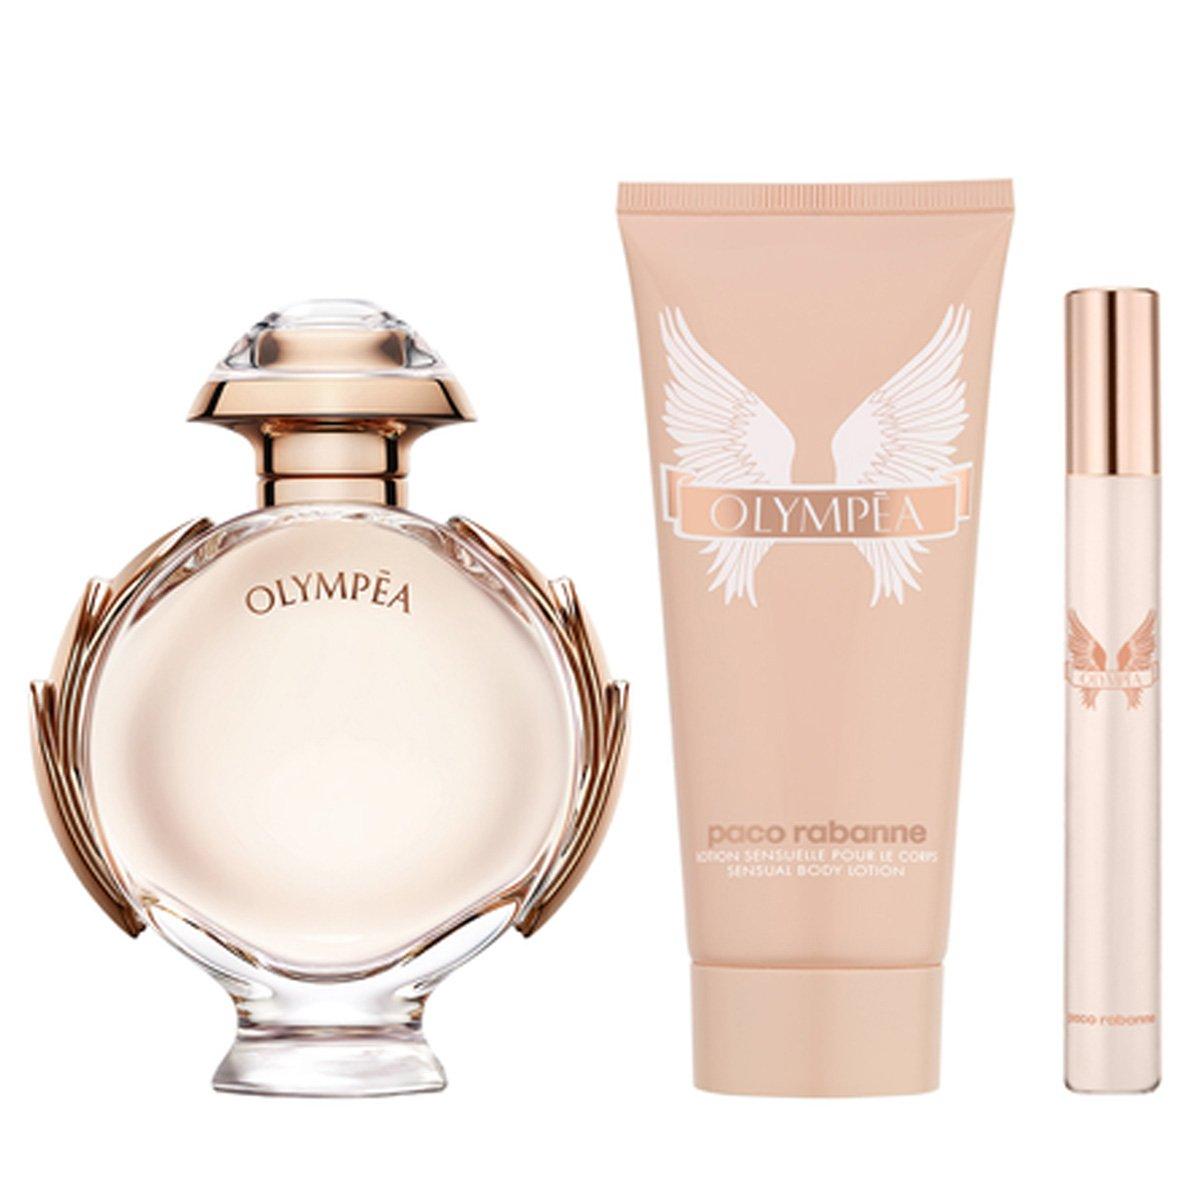 Paco Rabanne Olympea 3 Piece Gift Set